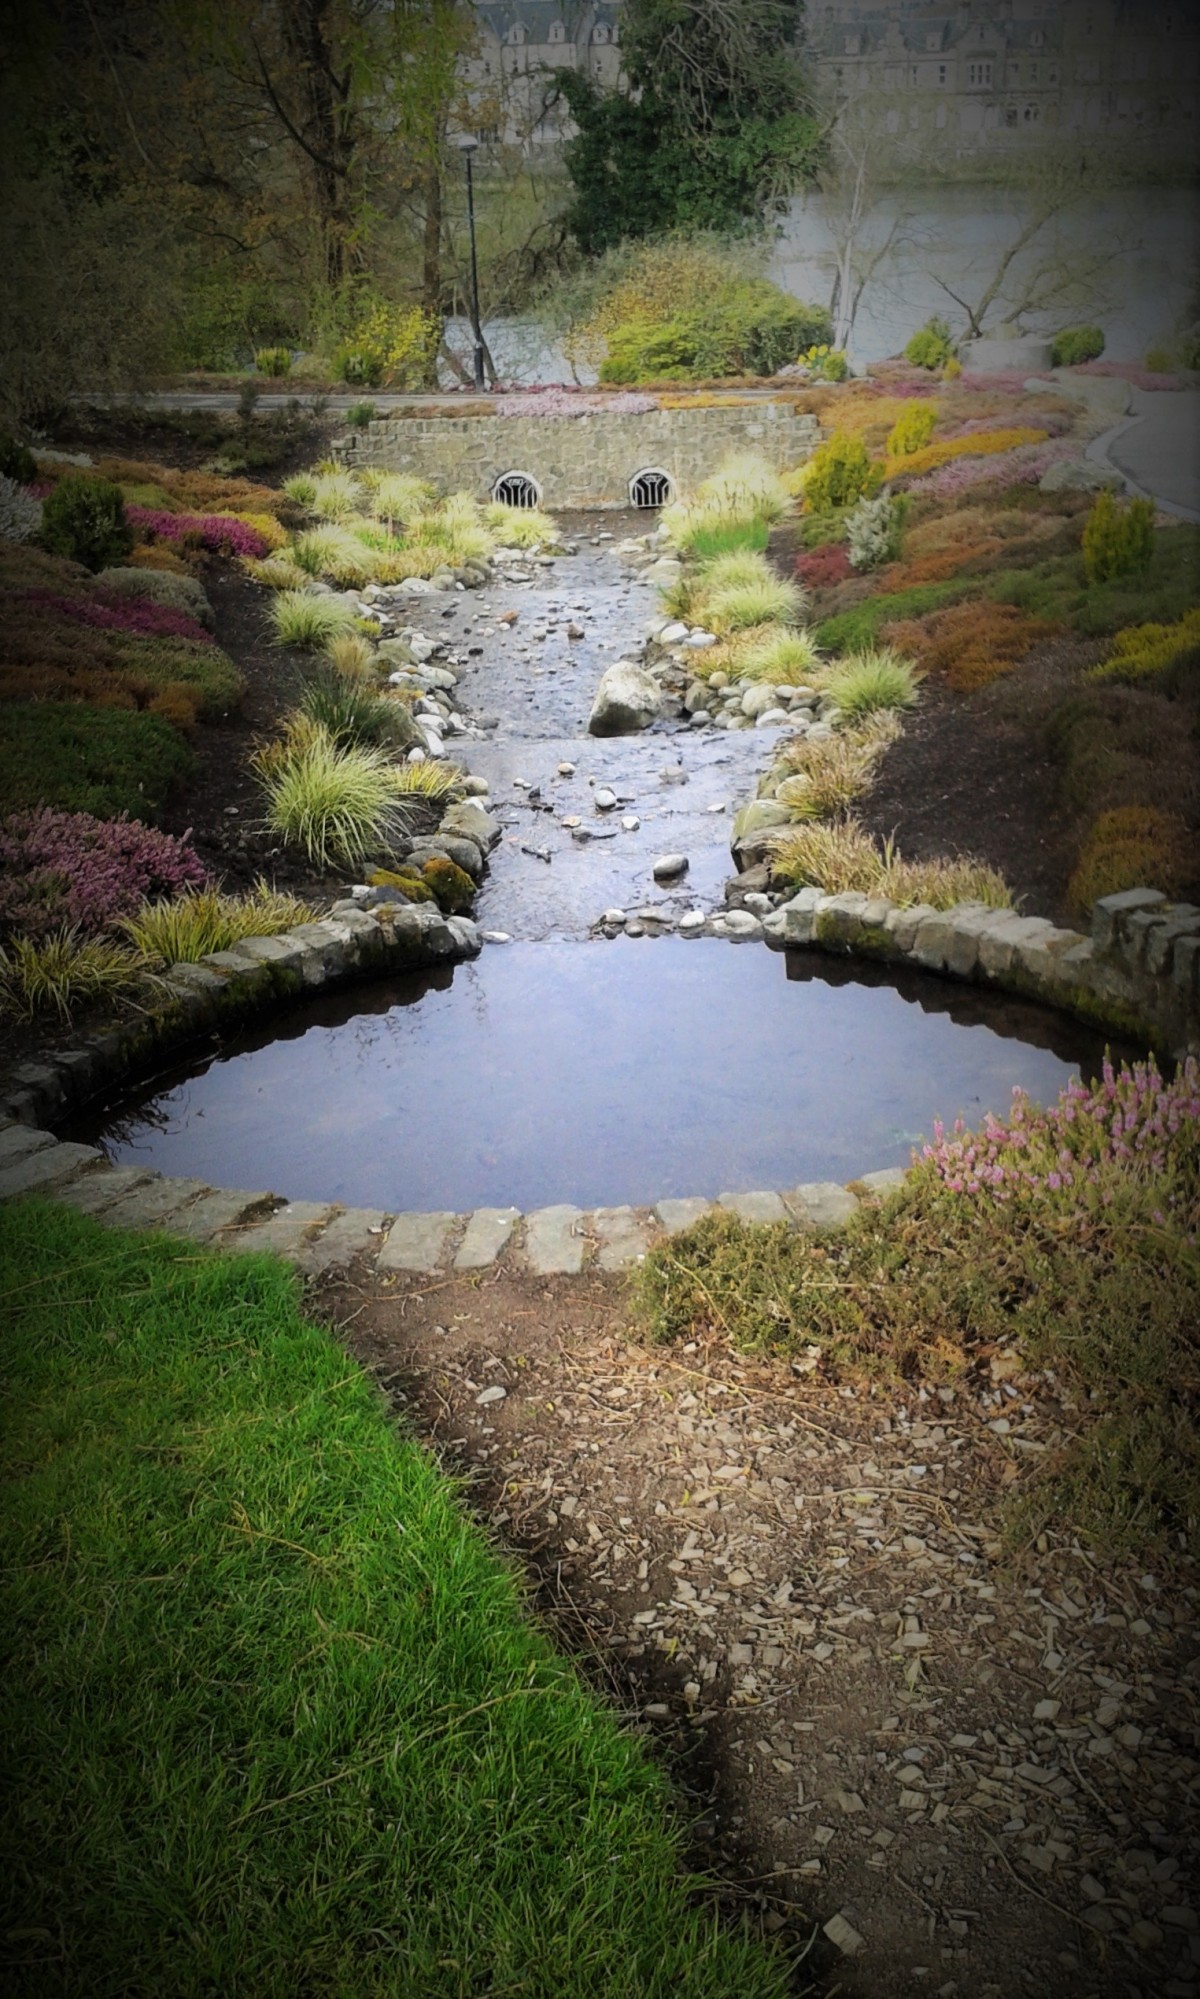 Rodney Gardens is a nice place to go for inspiration for your own garden.